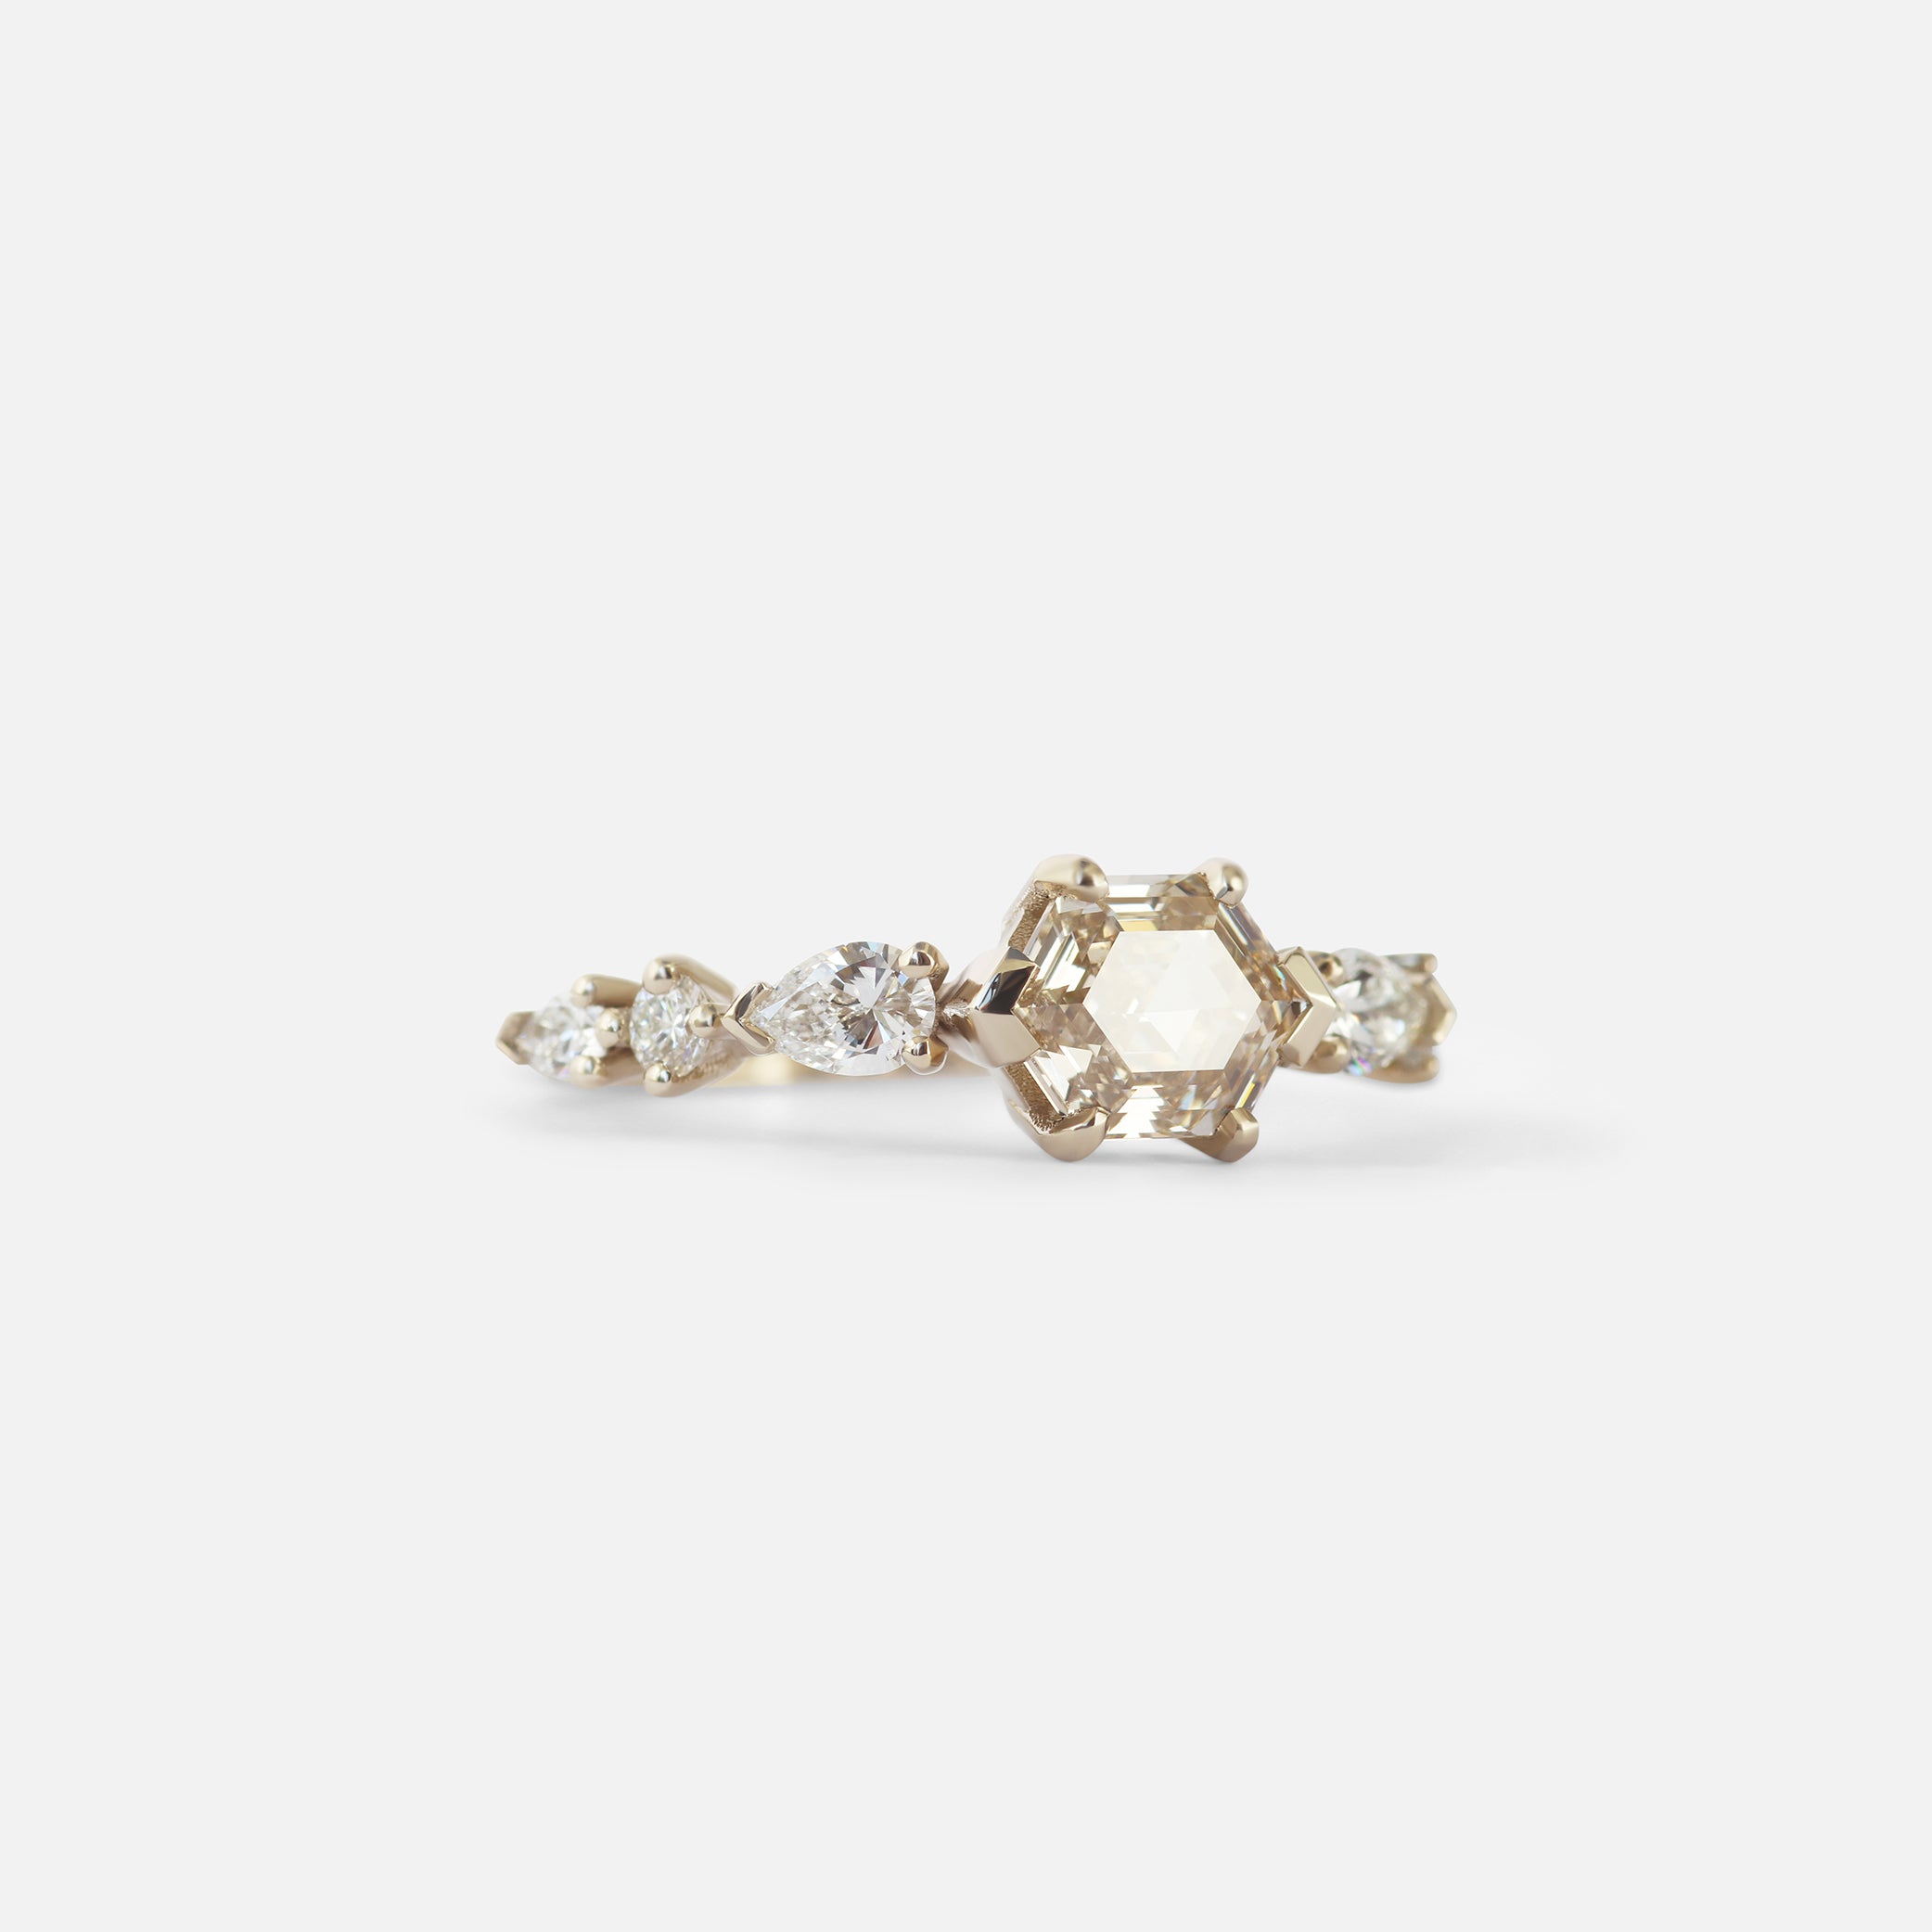 Champagne Hex and Pears / Ring By fitzgerald jewelry in Engagement Rings Category